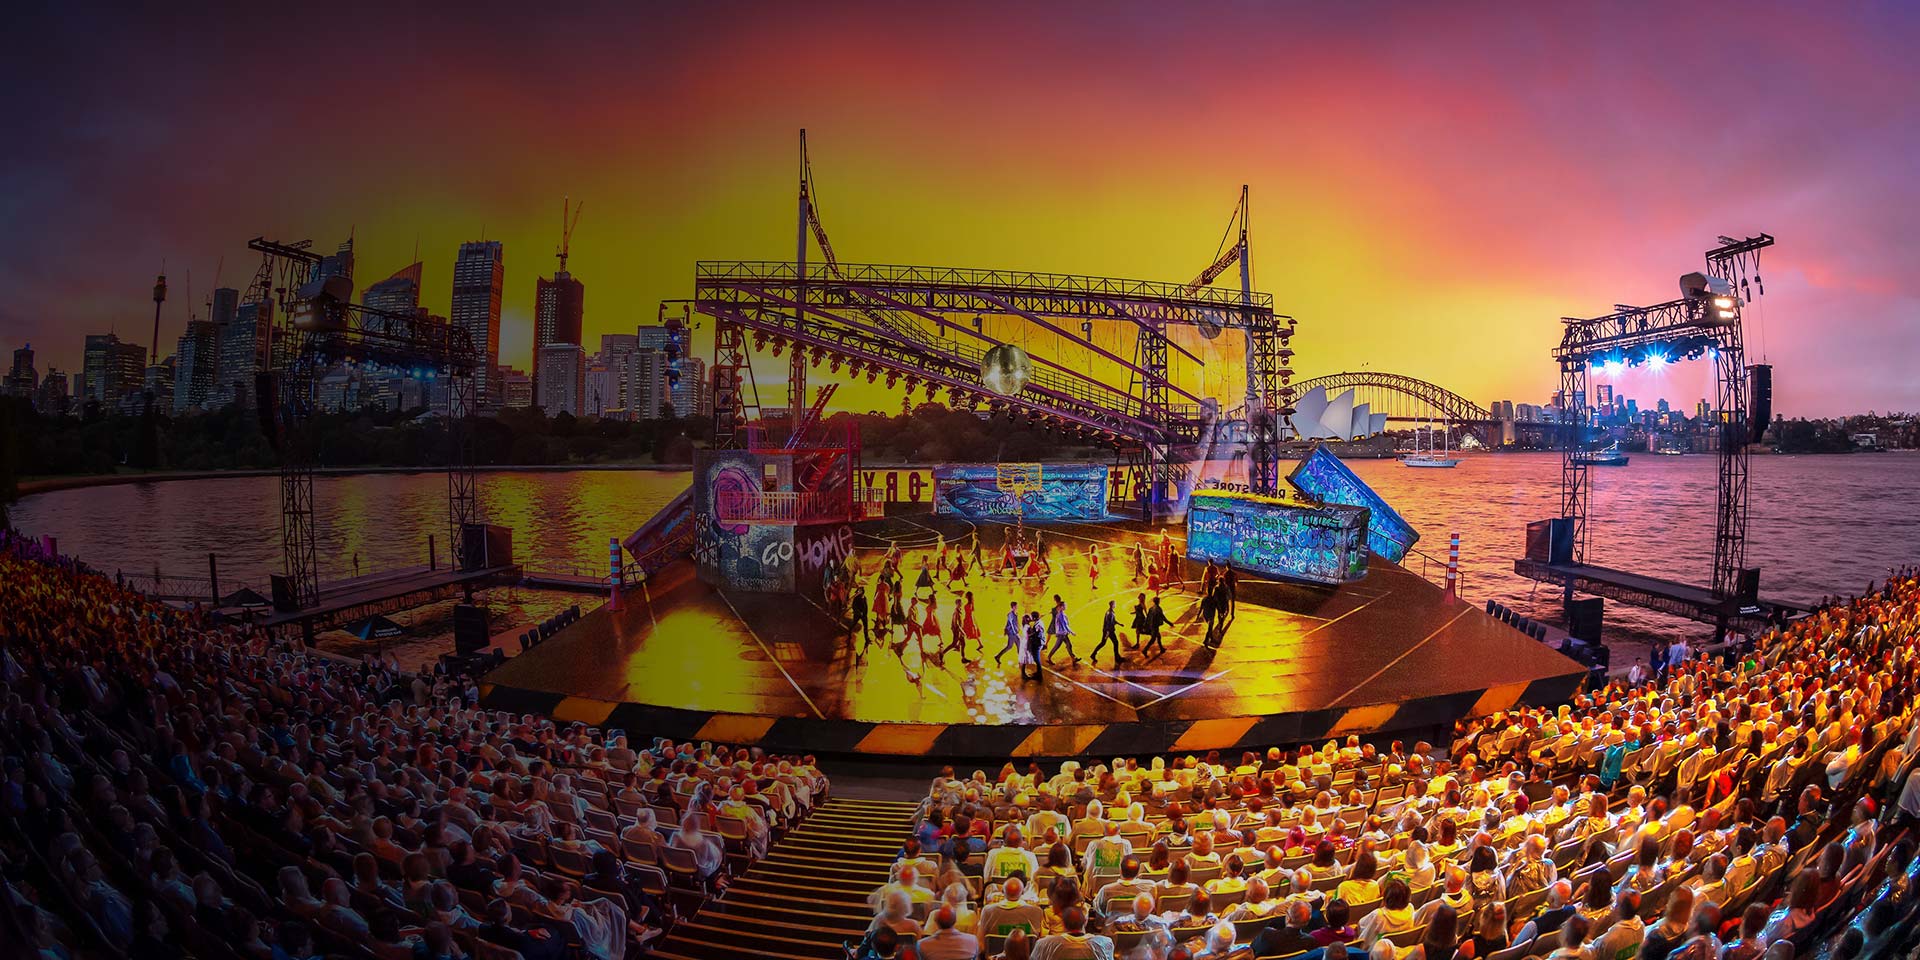 West Side Story – Handa Opera on the Harbour